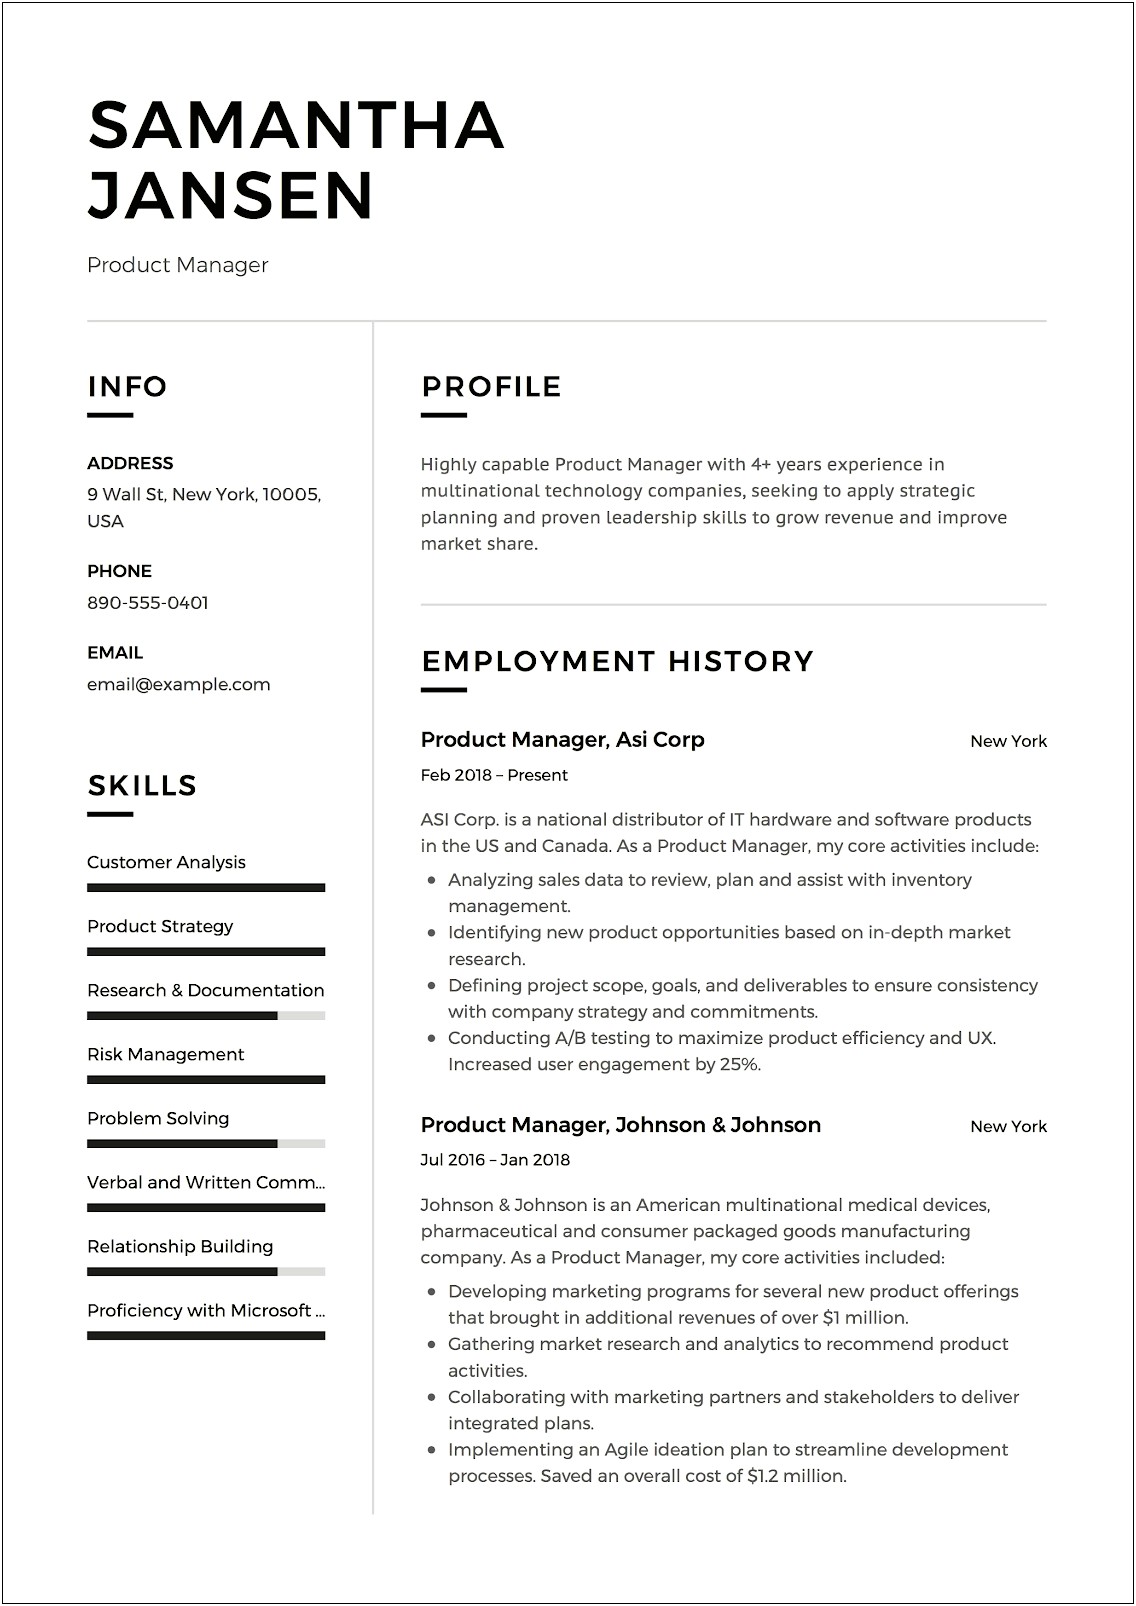 Where To Put Shadowing Experience On A Resume